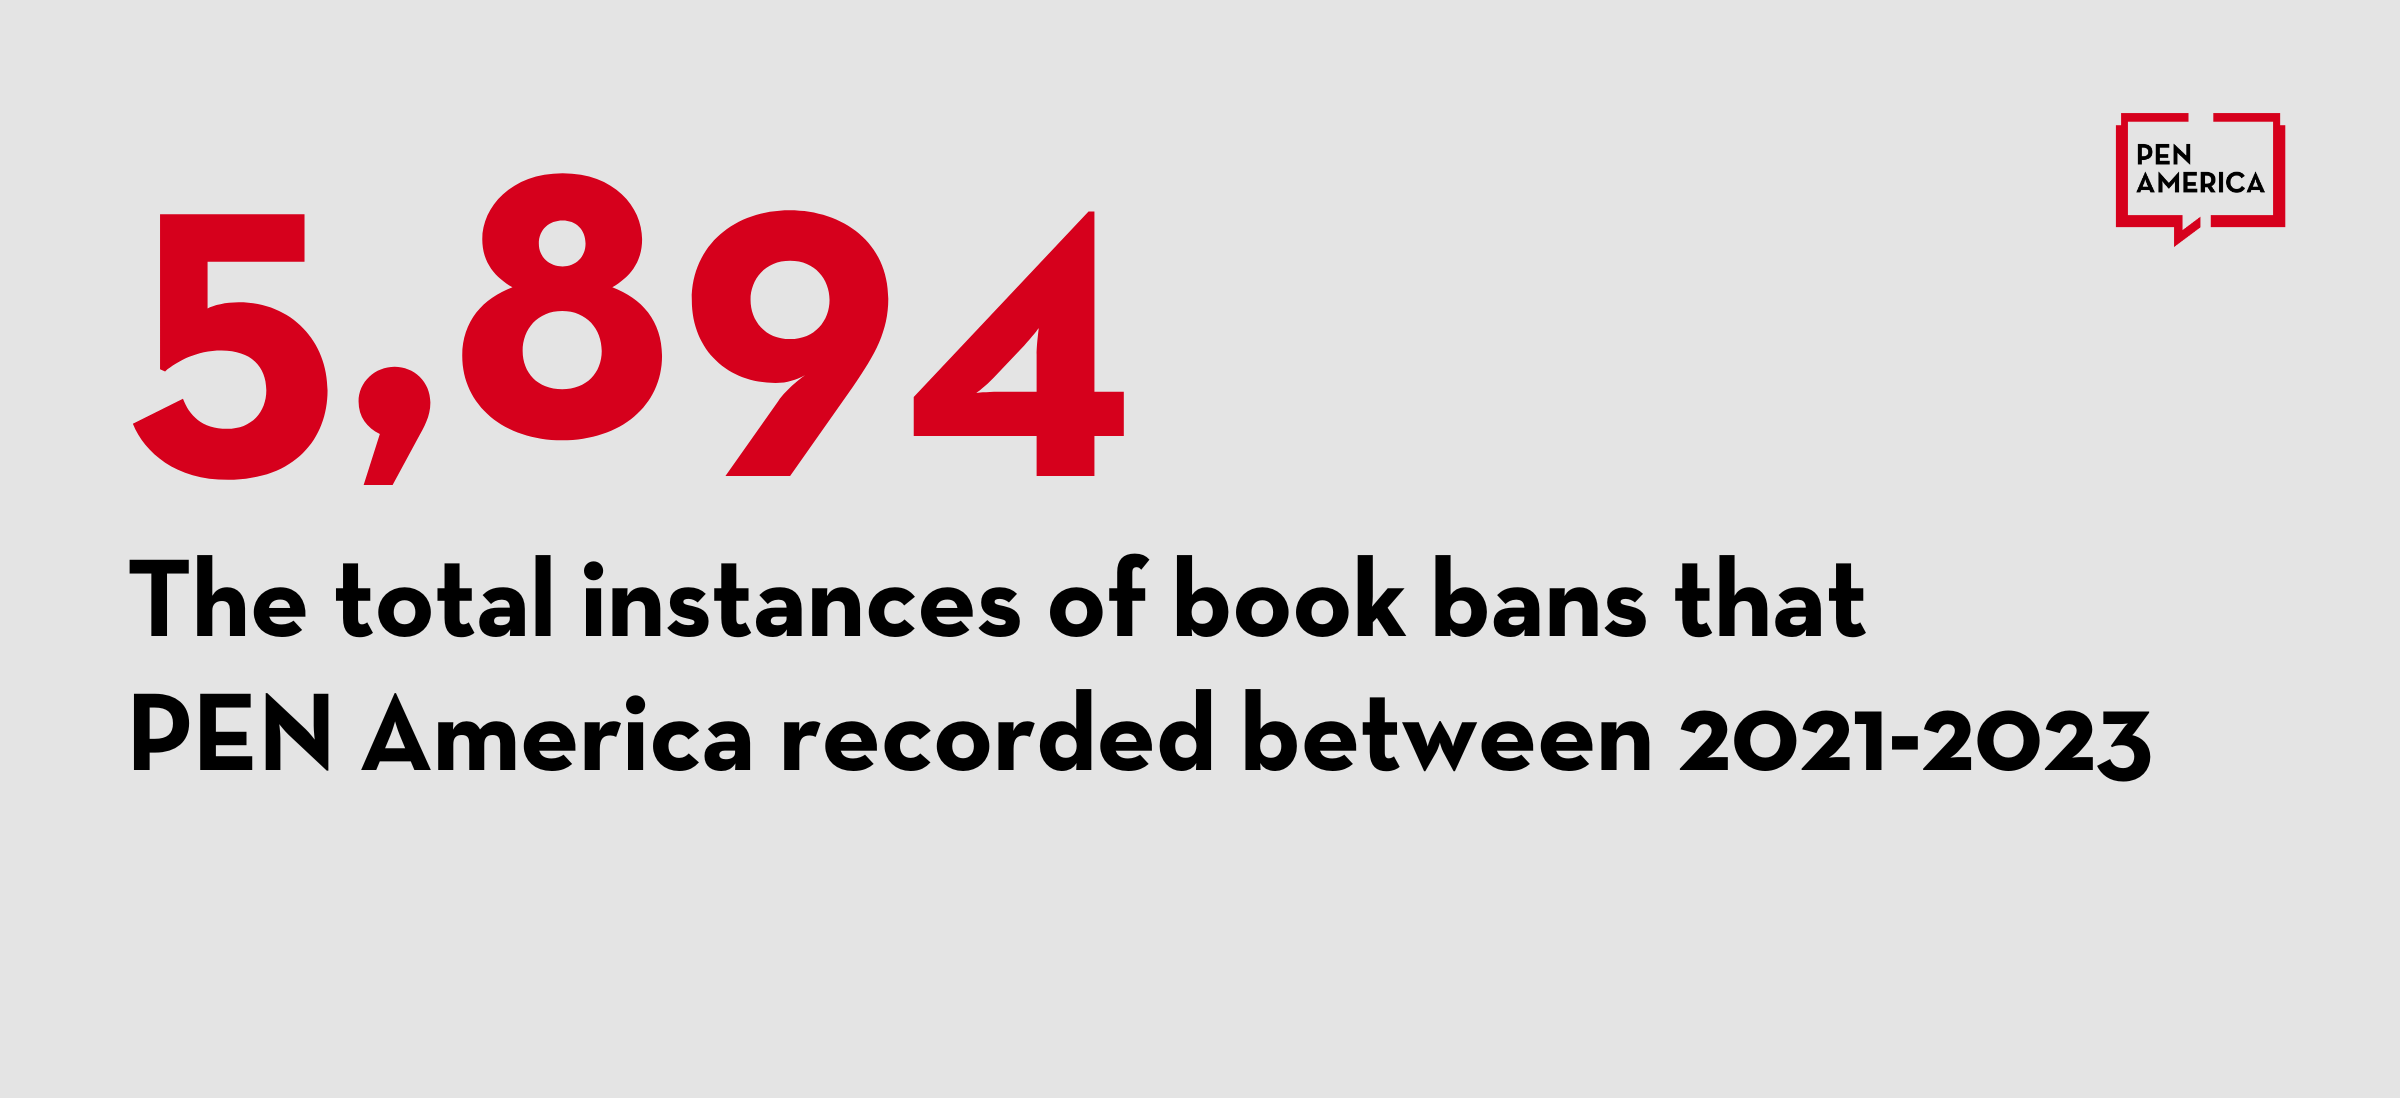 total number of book bans recorded between 2021-2023 by PEN in schools. 